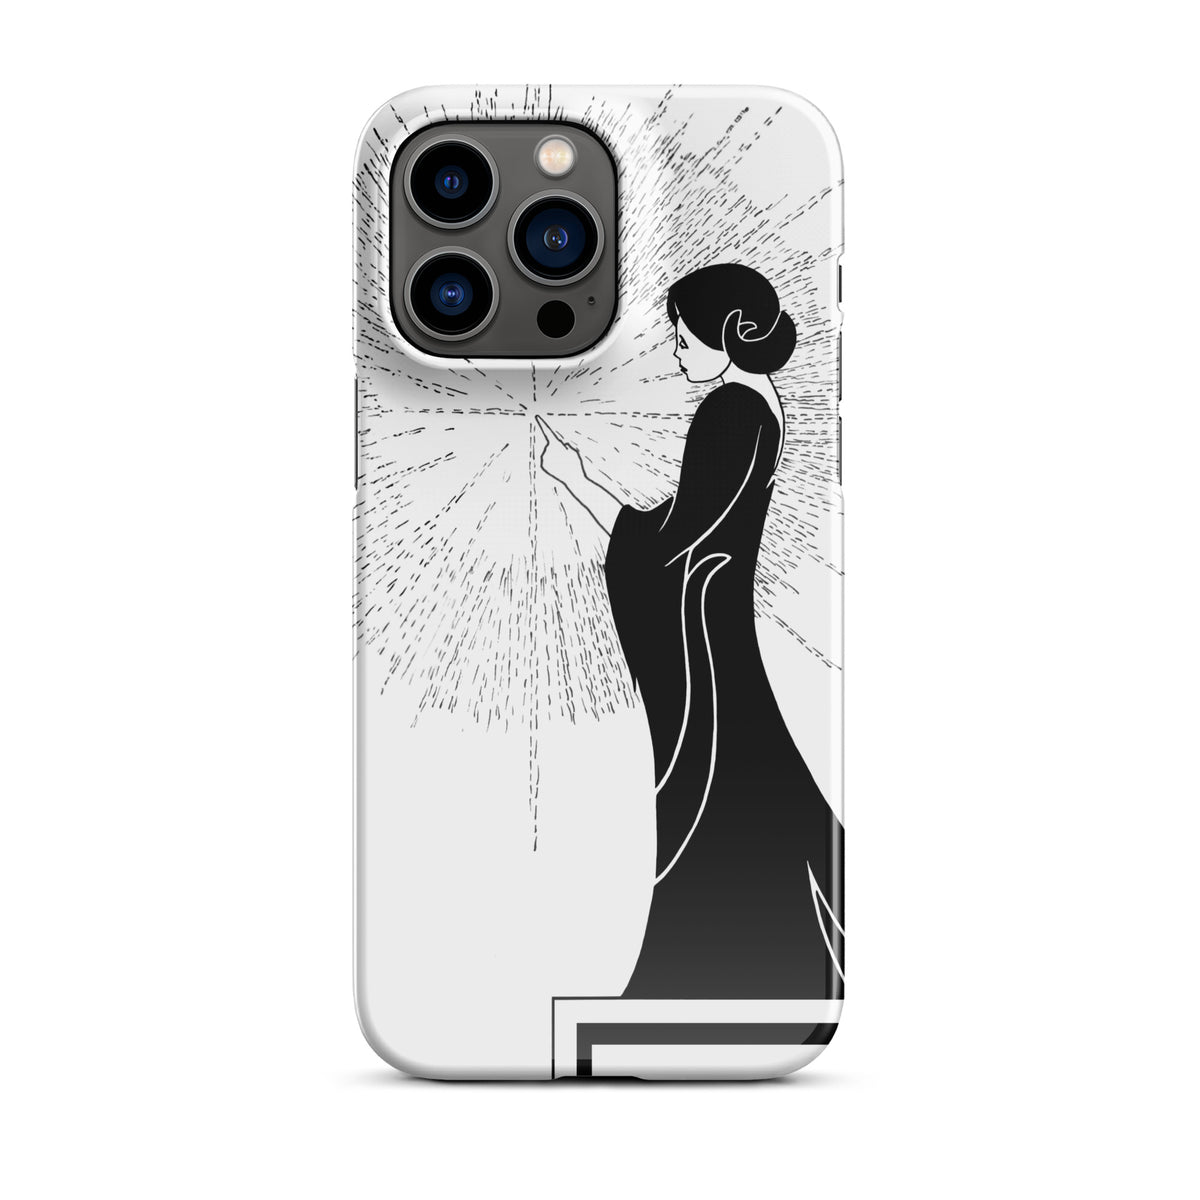 iPhone Case with an ink drawing of a woman touching the spark of creation in an Art Deco style